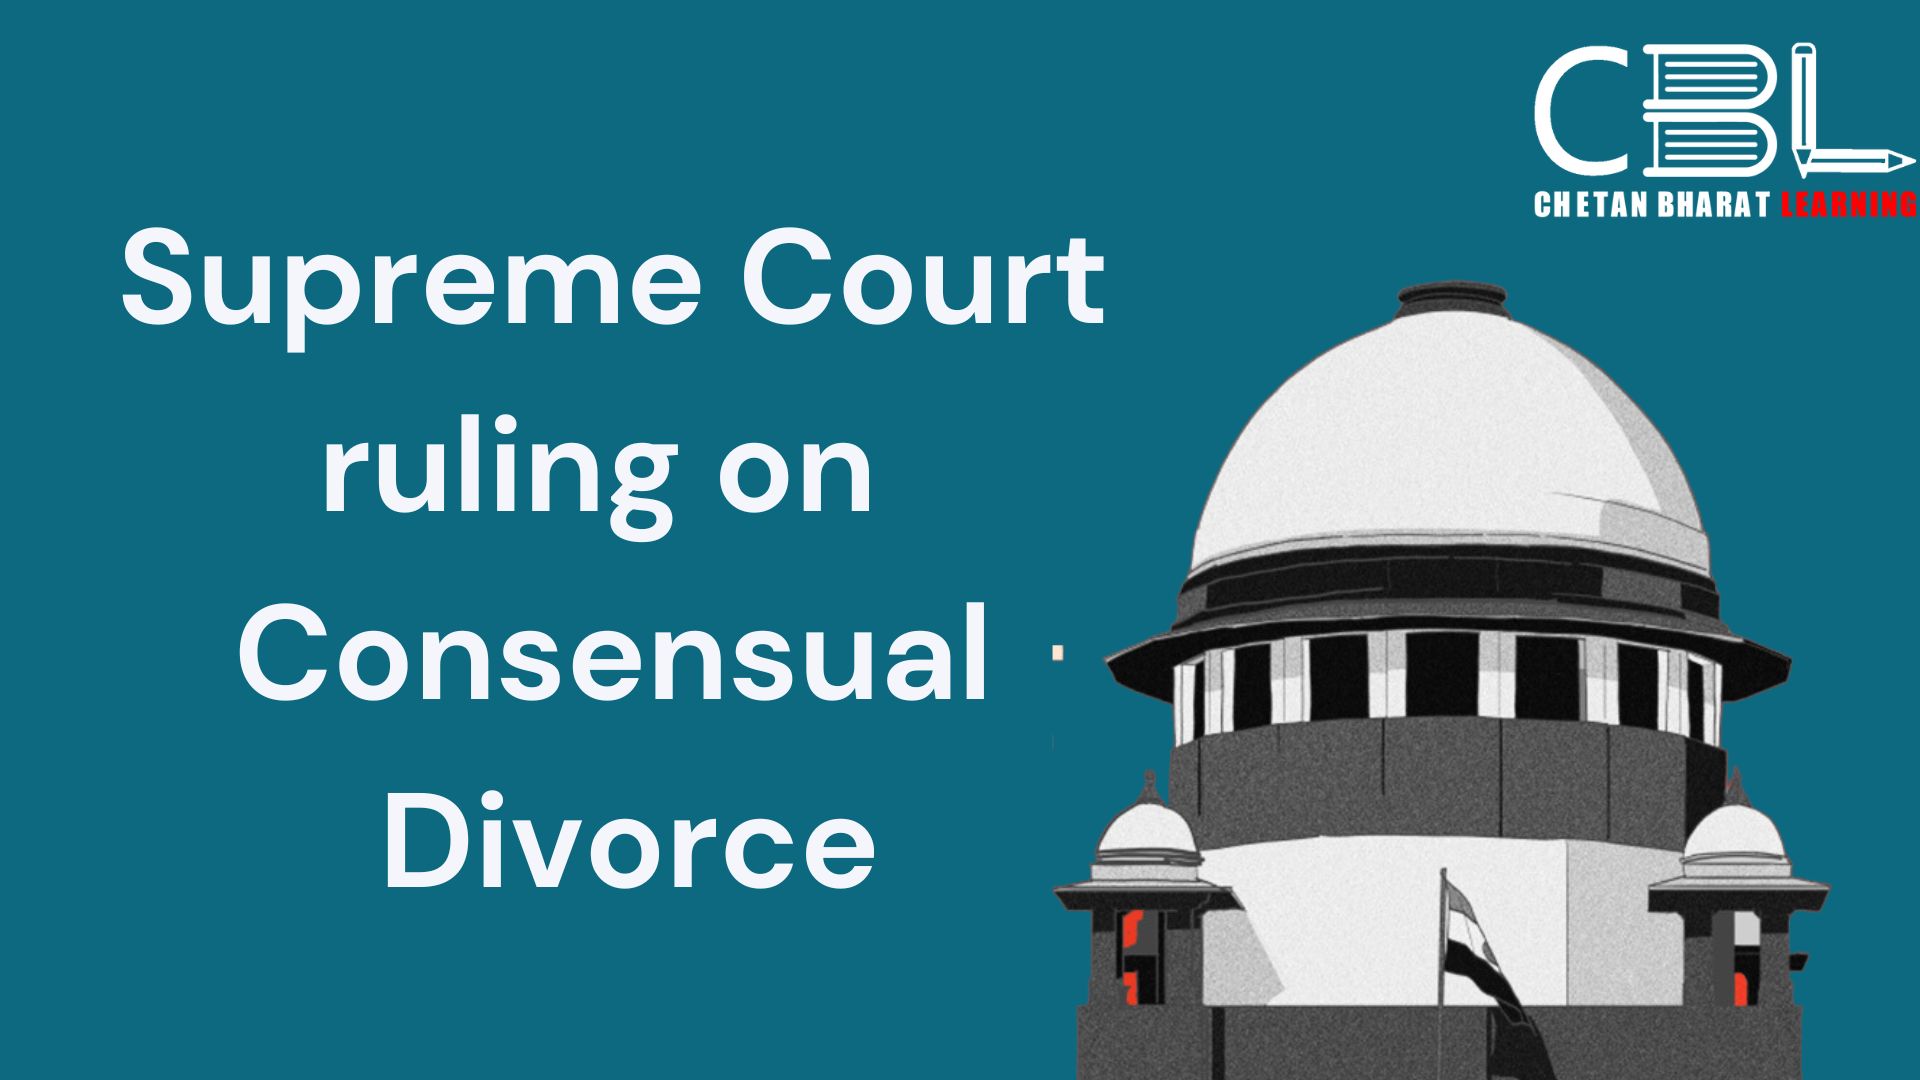 Supreme Court ruling on Consensual Divorce